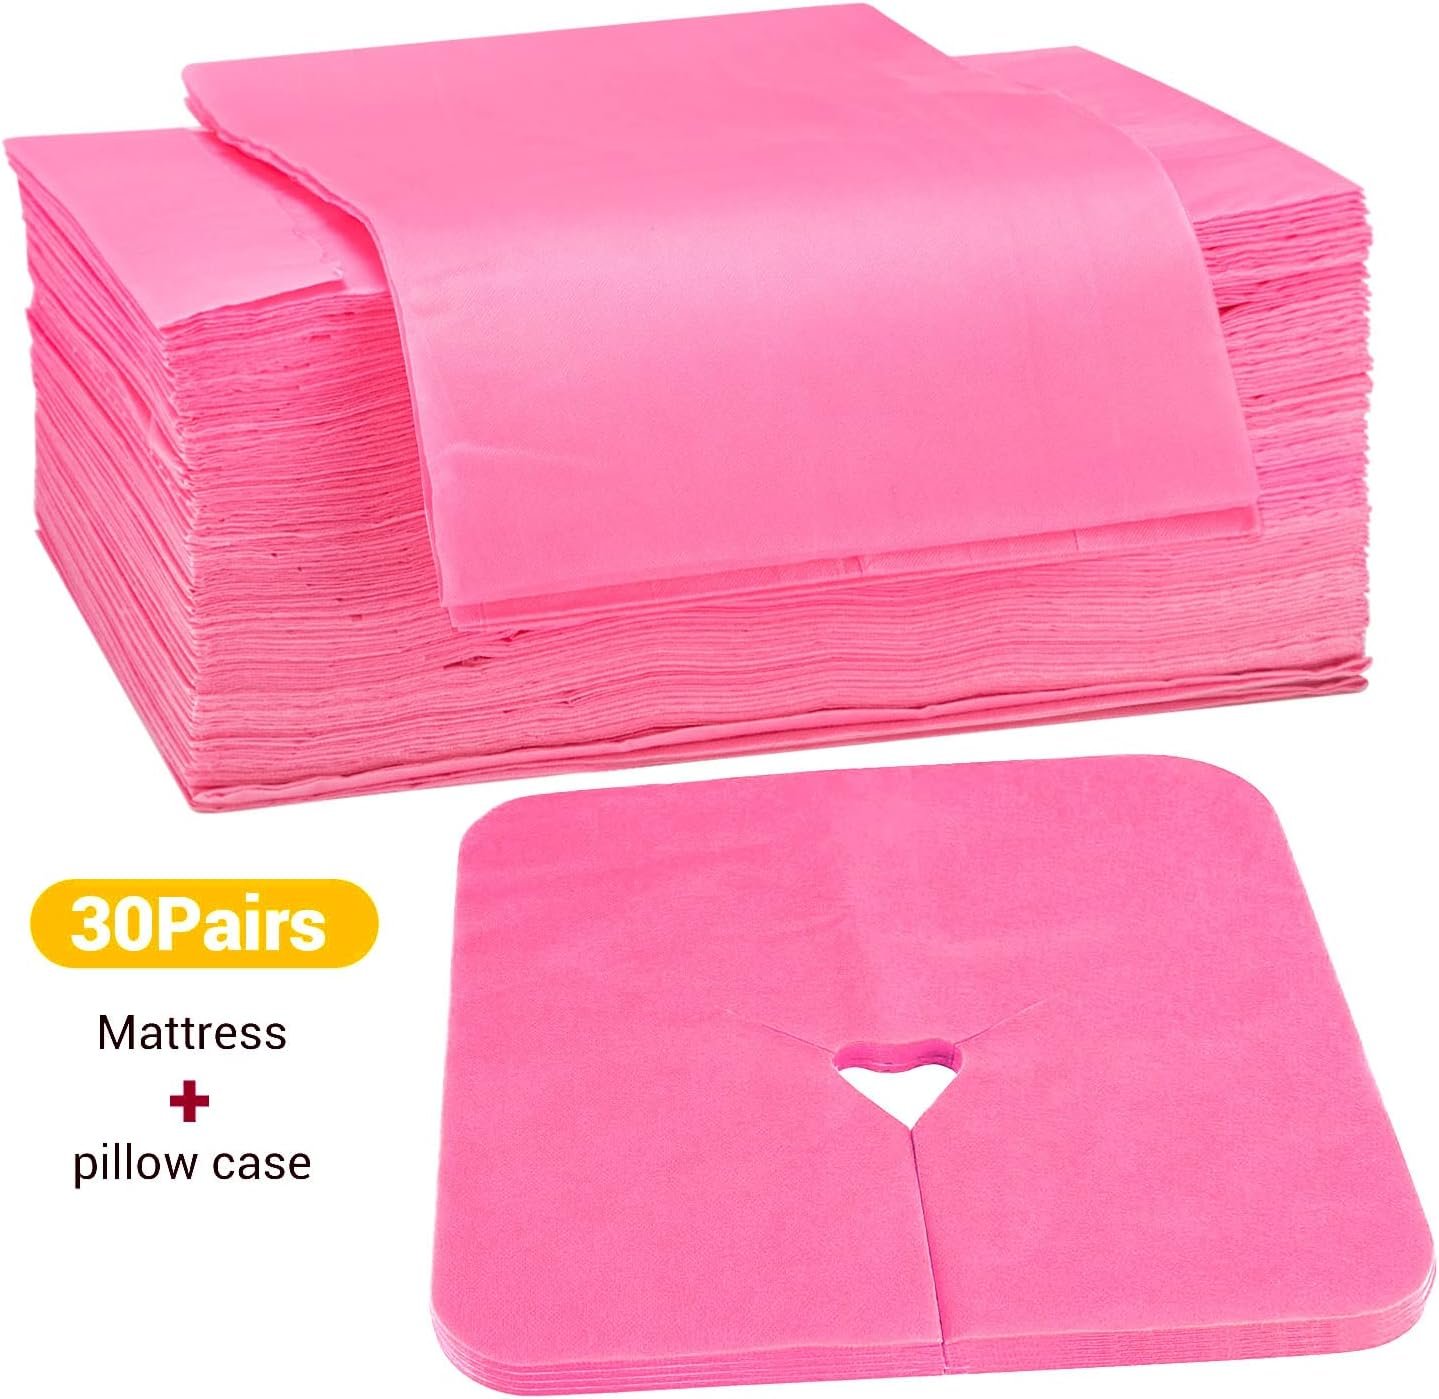 Noverlife 60PCS Disposable Massage Table Covers  Face Rest Barrier, Waterpoof Oilproof Disposable Sheets Table Cover for Spa Beauty Salon, Breathable Non Woven Fabric Face Cradle Covers - Pink